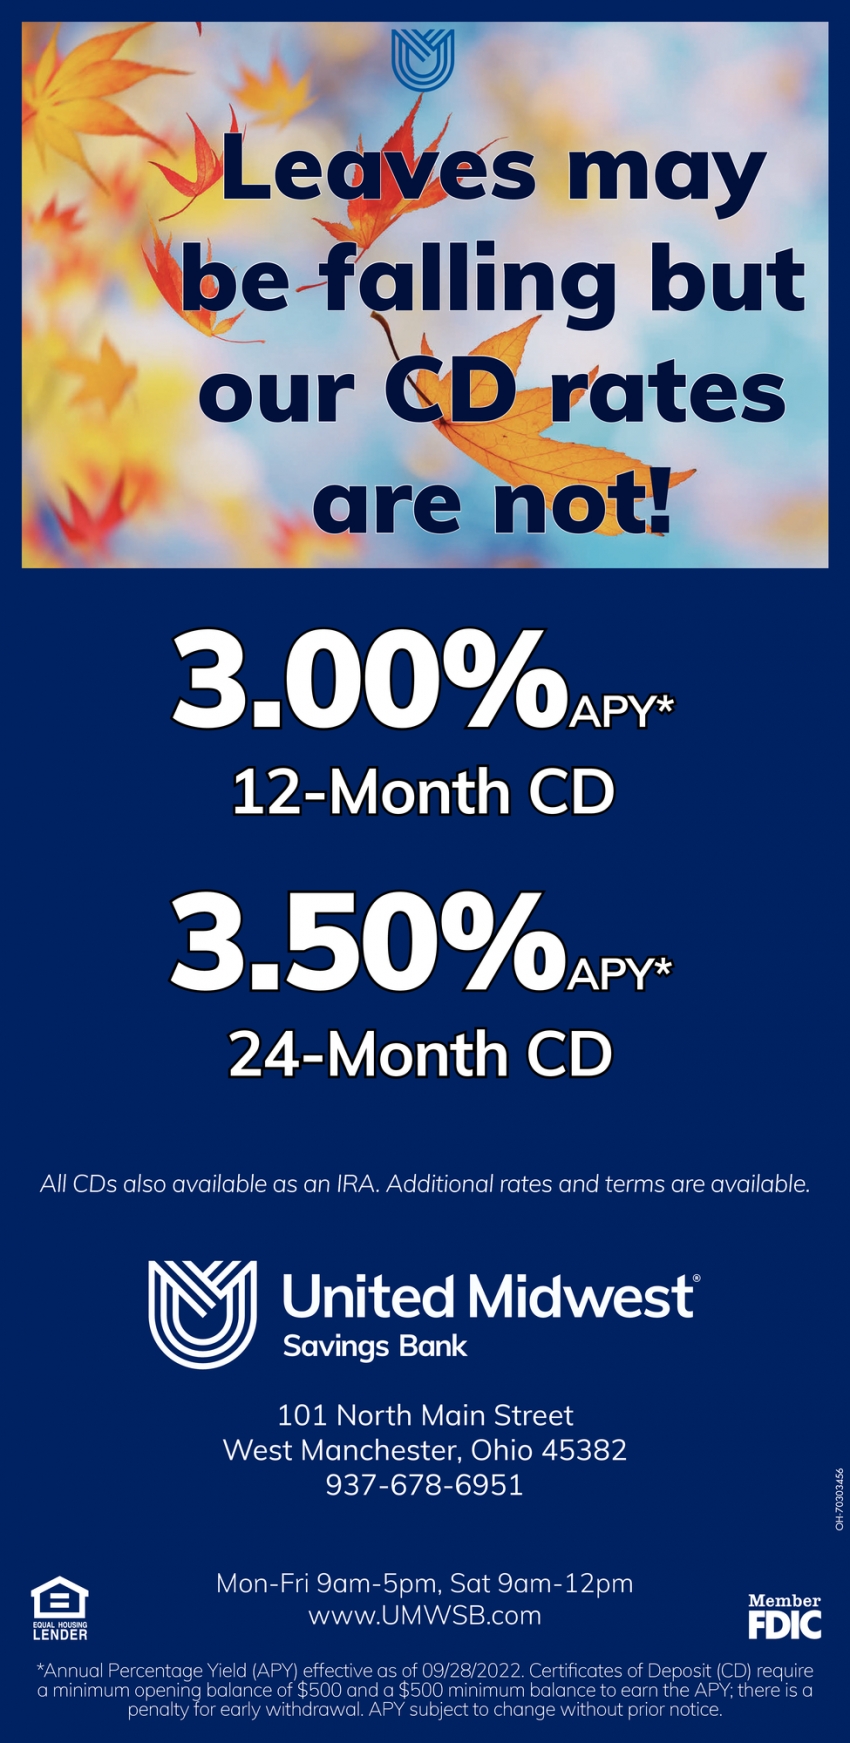 Leaves May Be Falling But Our CD Rates Are Not